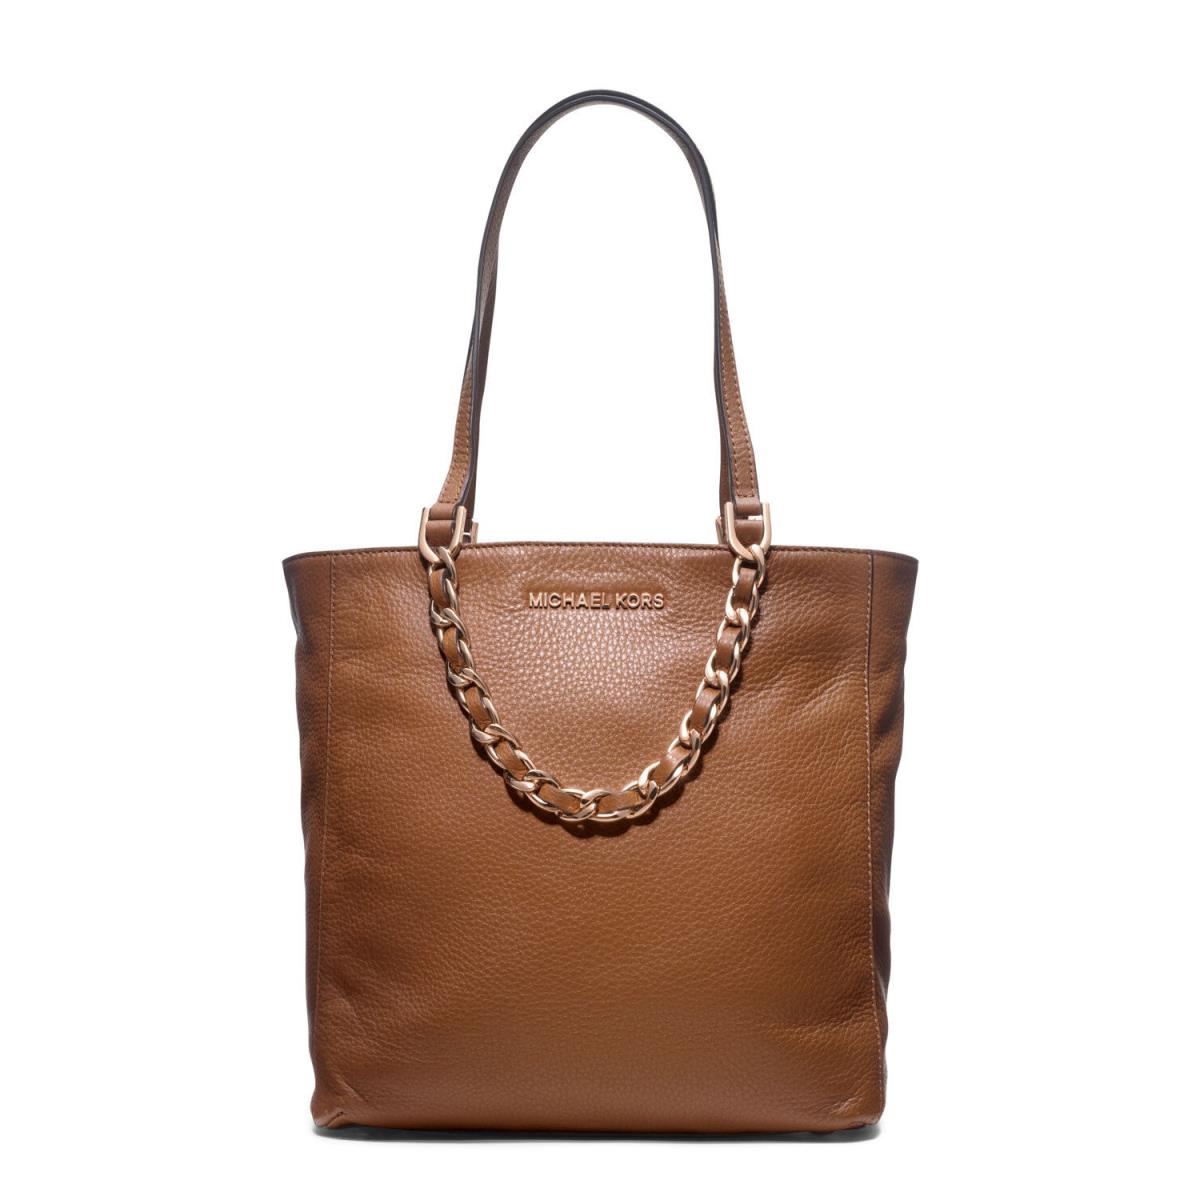 Michael Kors Harper North South Tote in Luggage Brown Non Outlet